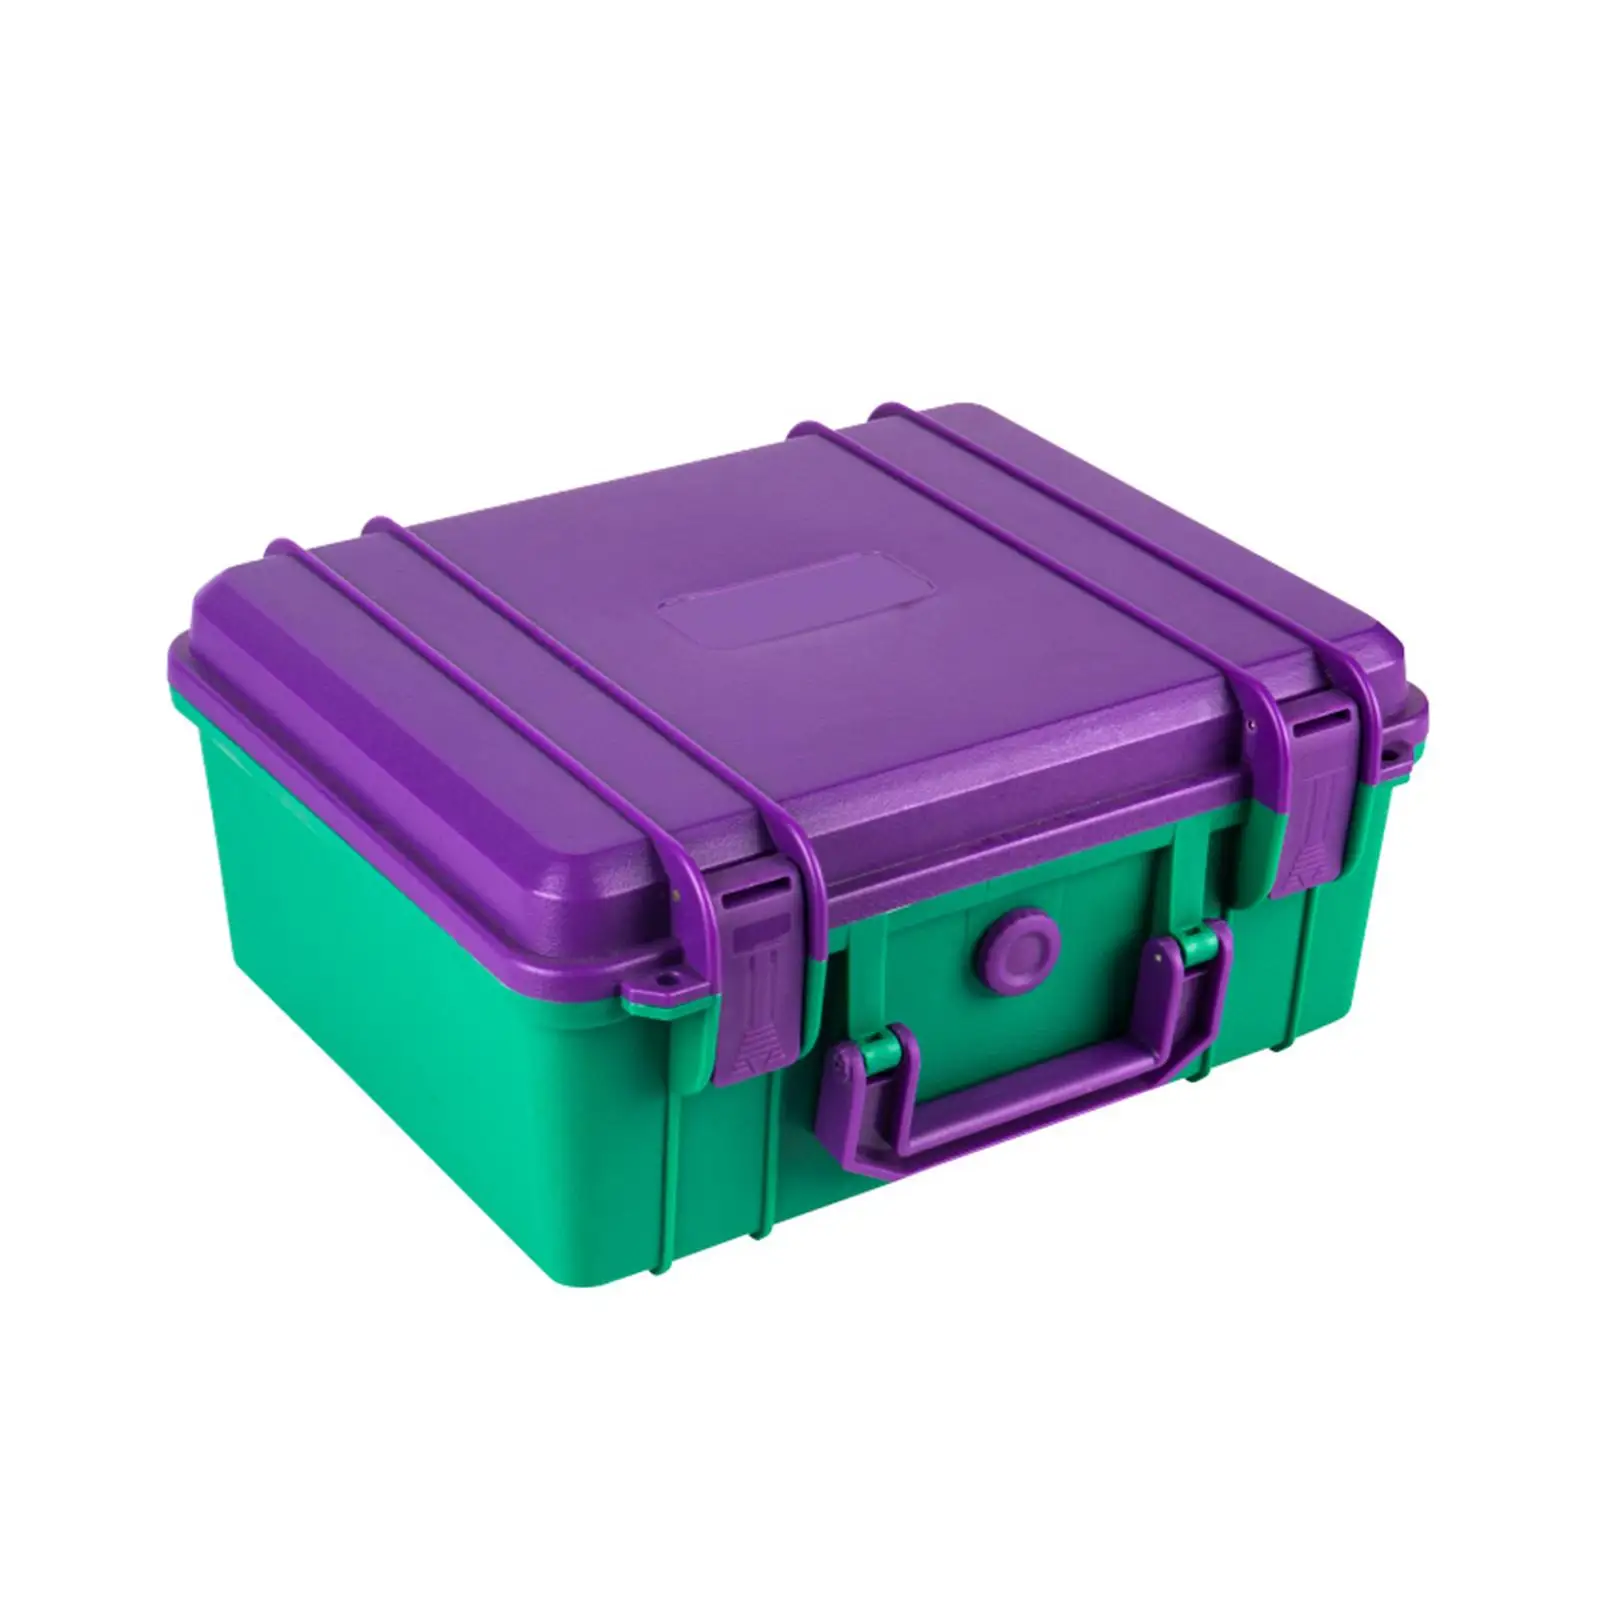 Protective Case Violet and Green Organization Portable Outdoor Camping Accessories Organizer 280x240x130mm Safety Tool Case